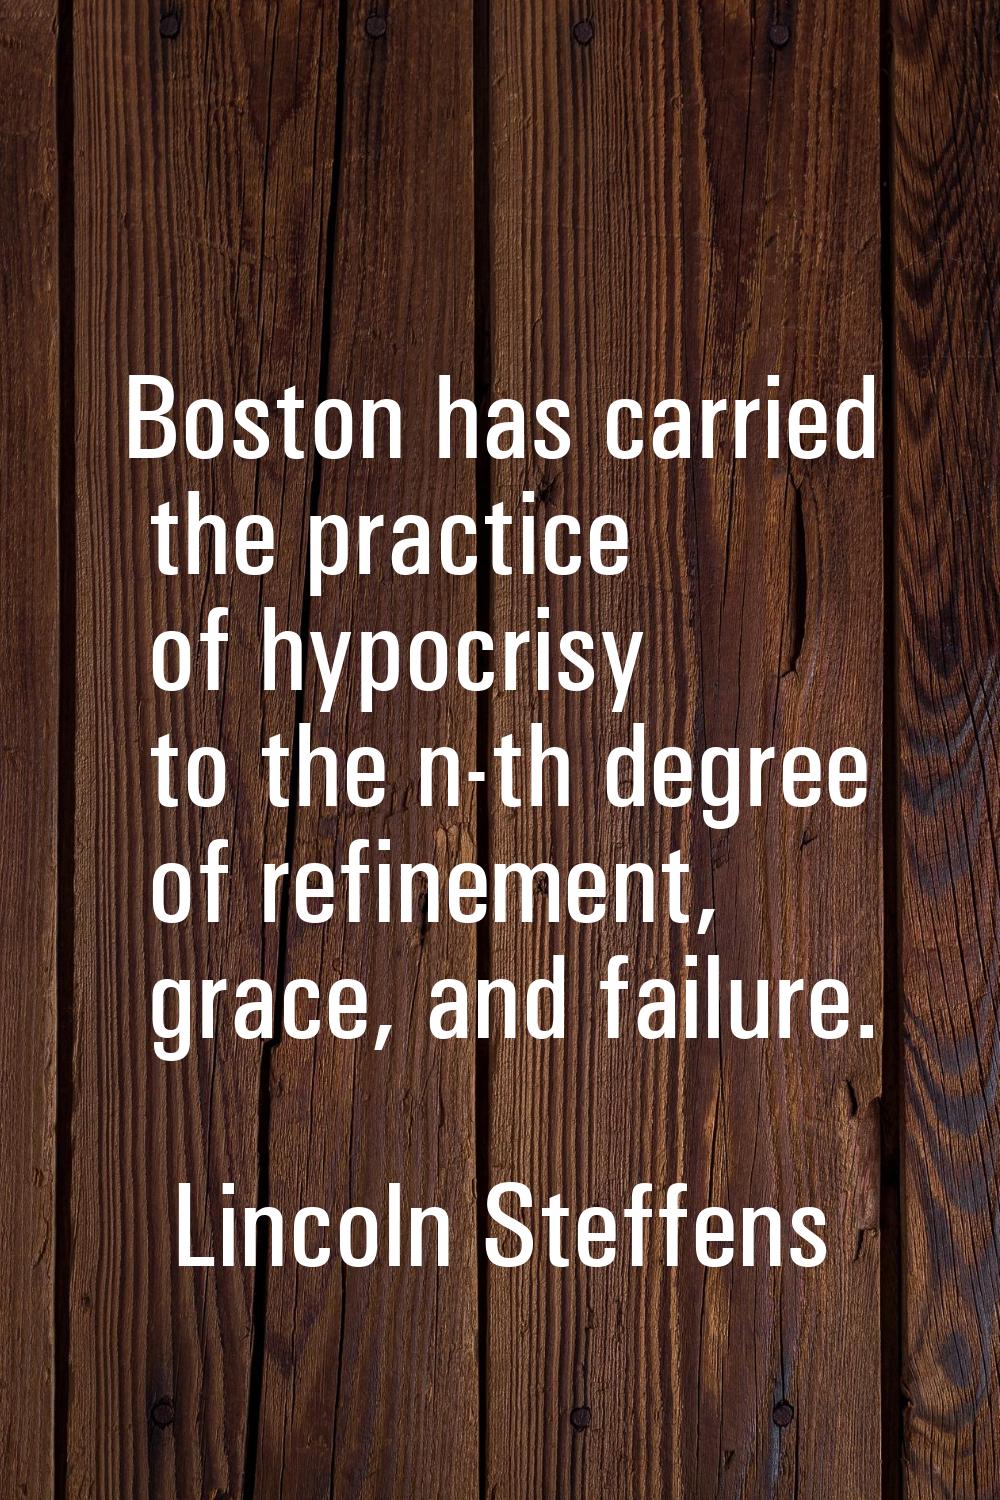 Boston has carried the practice of hypocrisy to the n-th degree of refinement, grace, and failure.